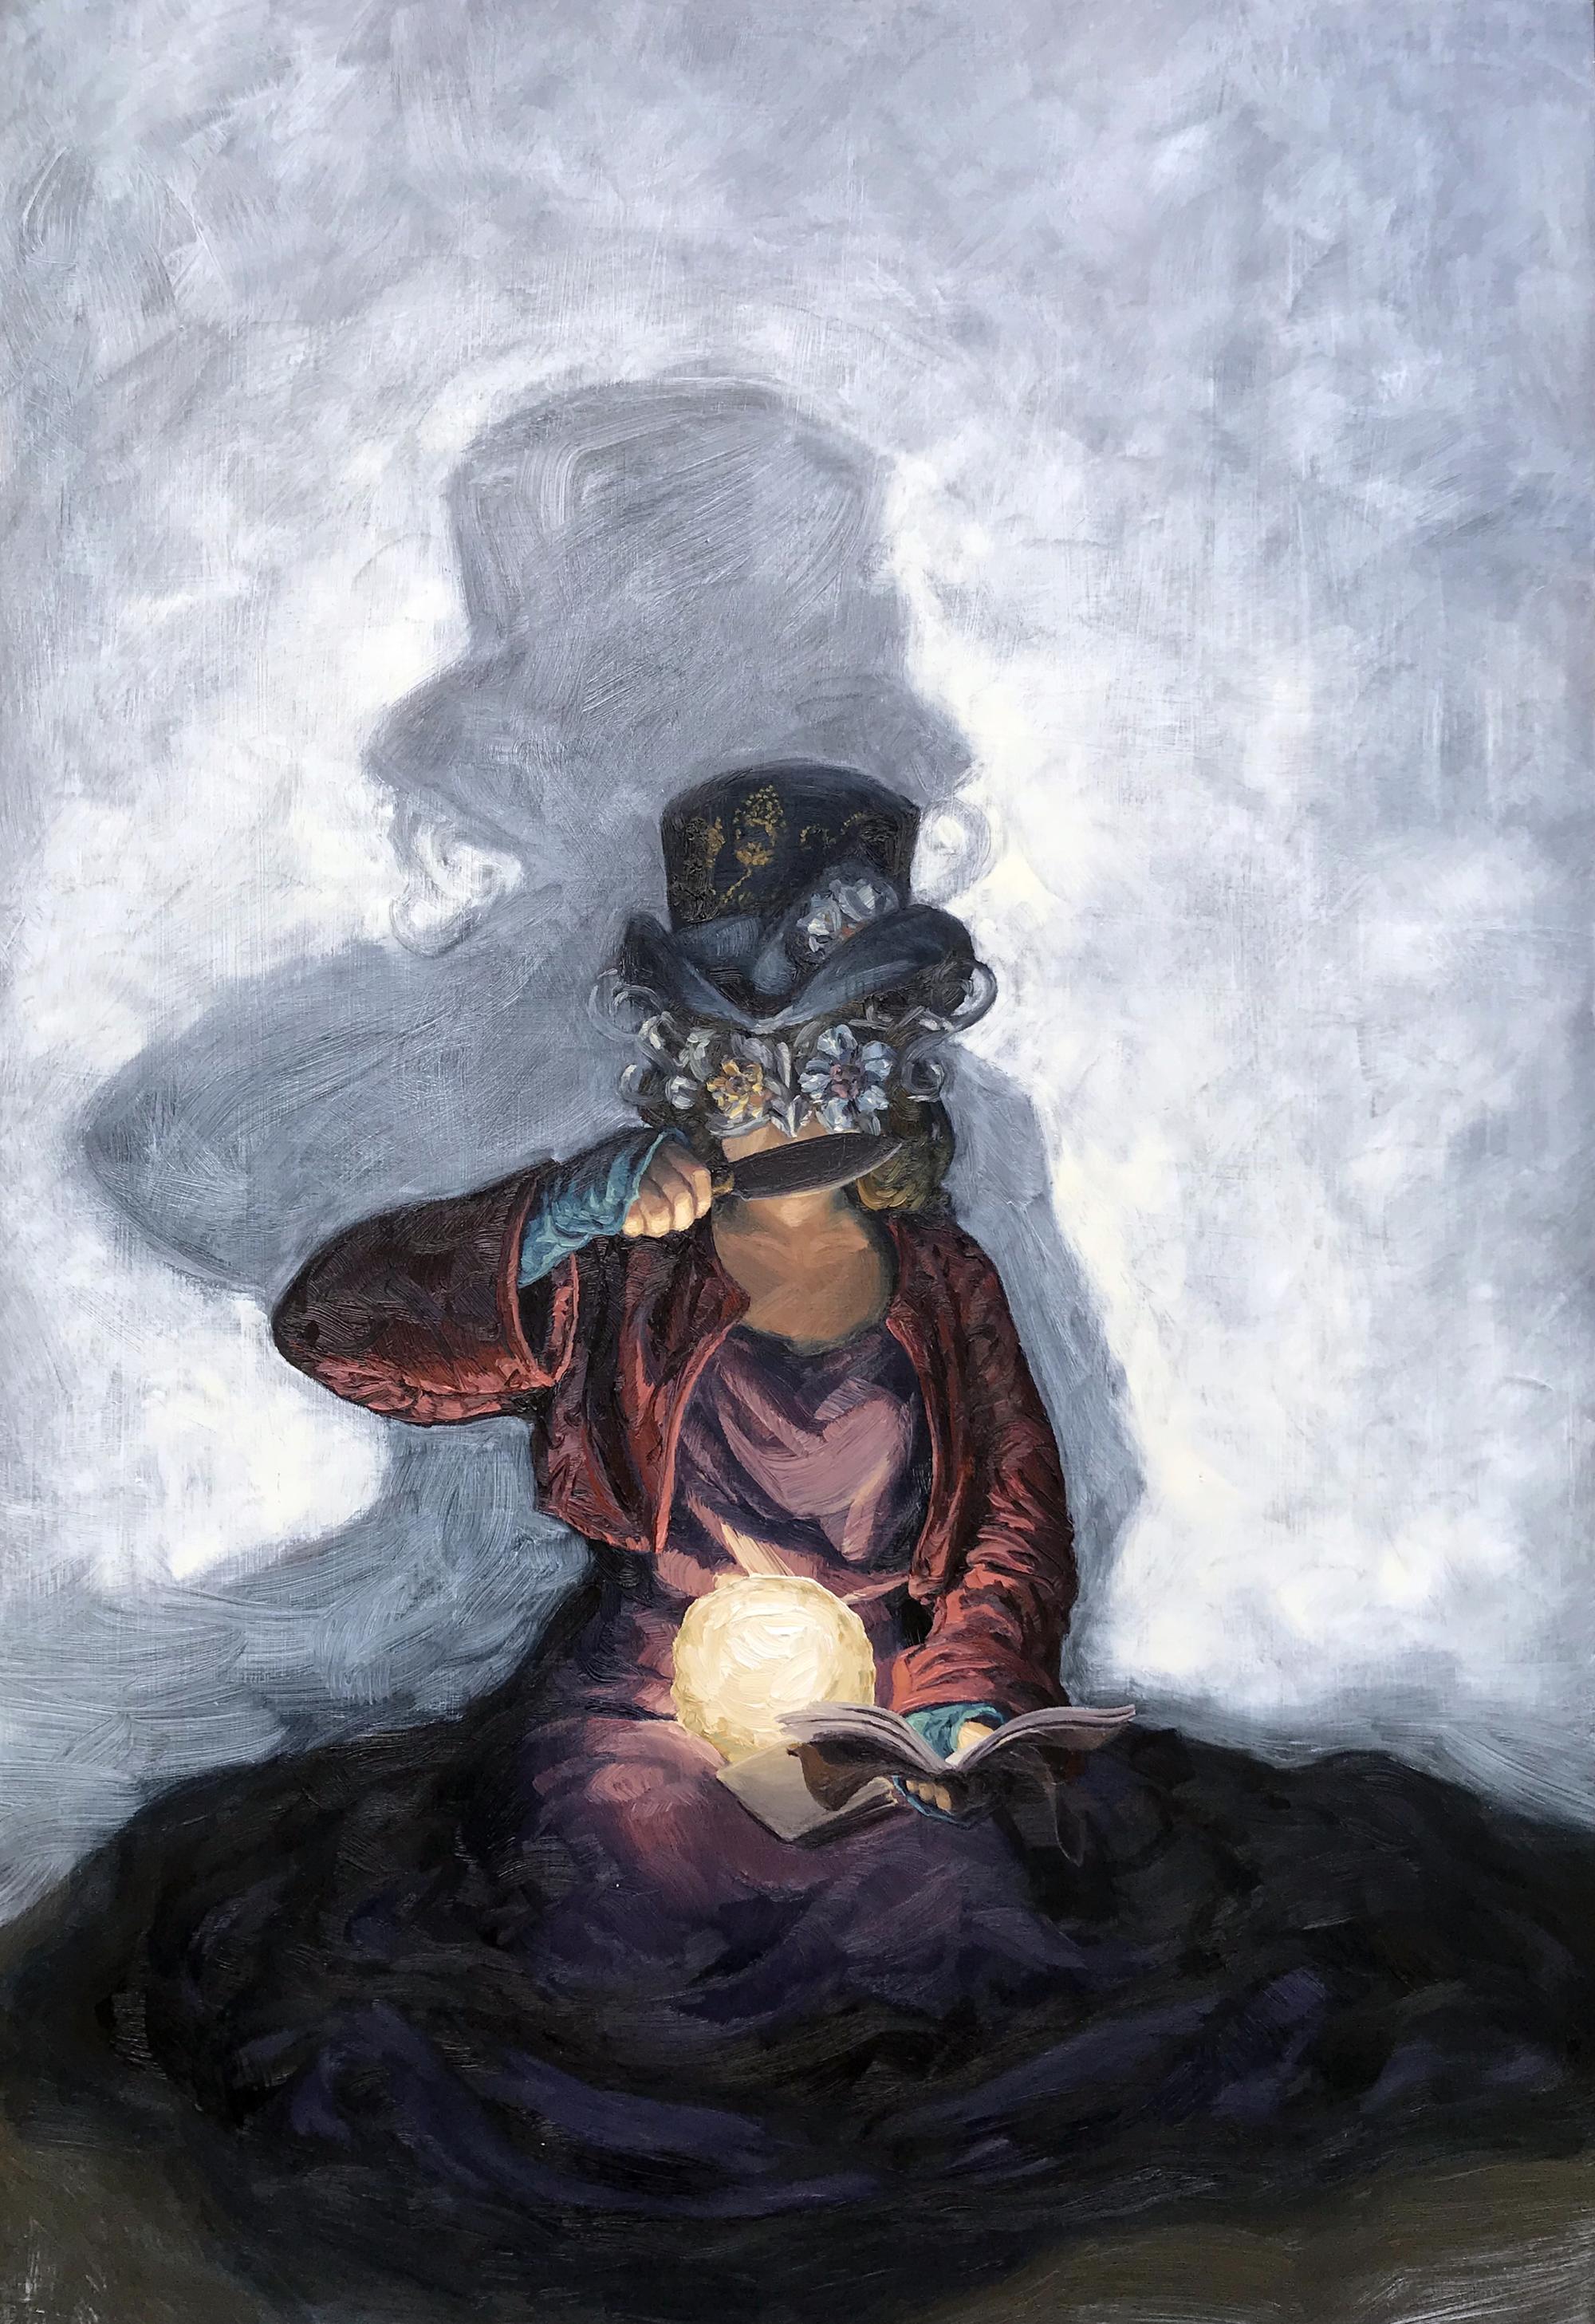 A figure wearing a top hat and a mask sits in the center of the painting, casting a large shadow against a white background.